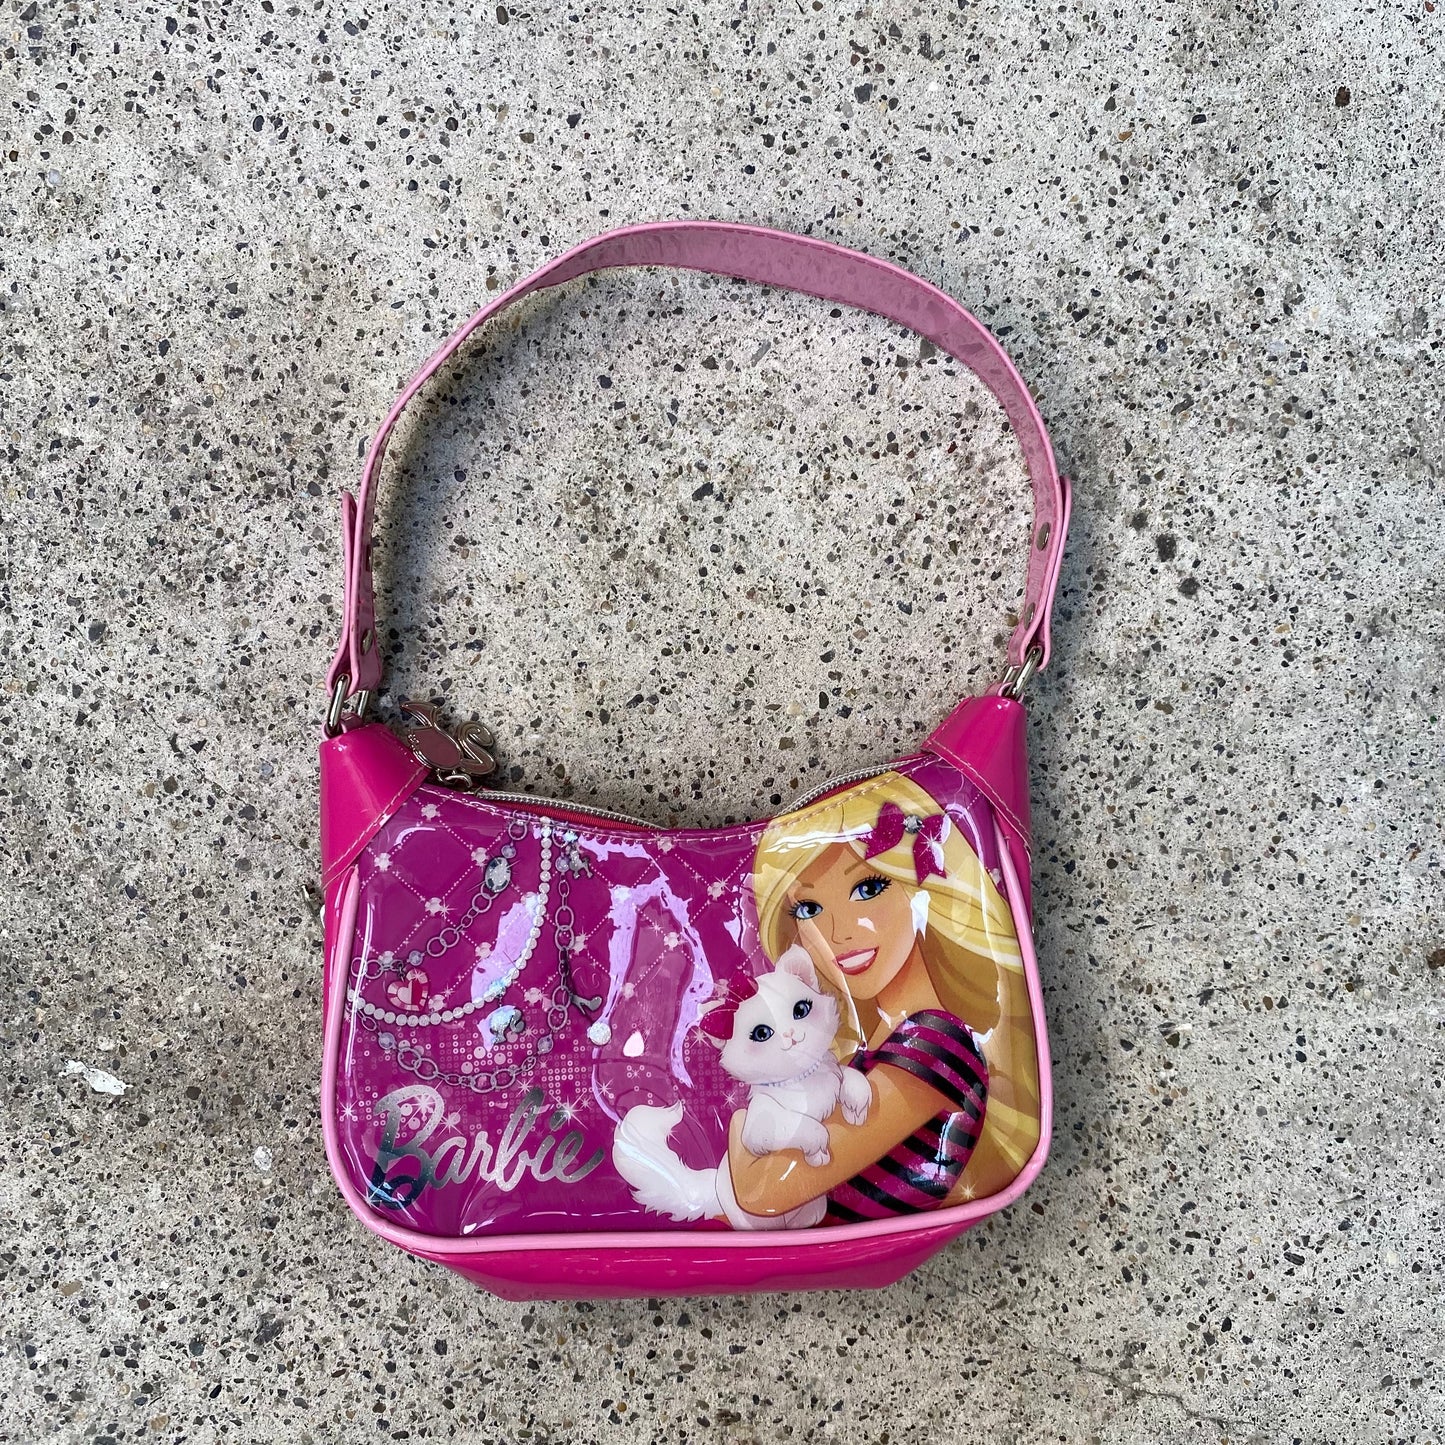 Barbie Likes It Handbag - STYLISTS COLLECTION | Painted Bird Vintage  Boutique & The Aviary